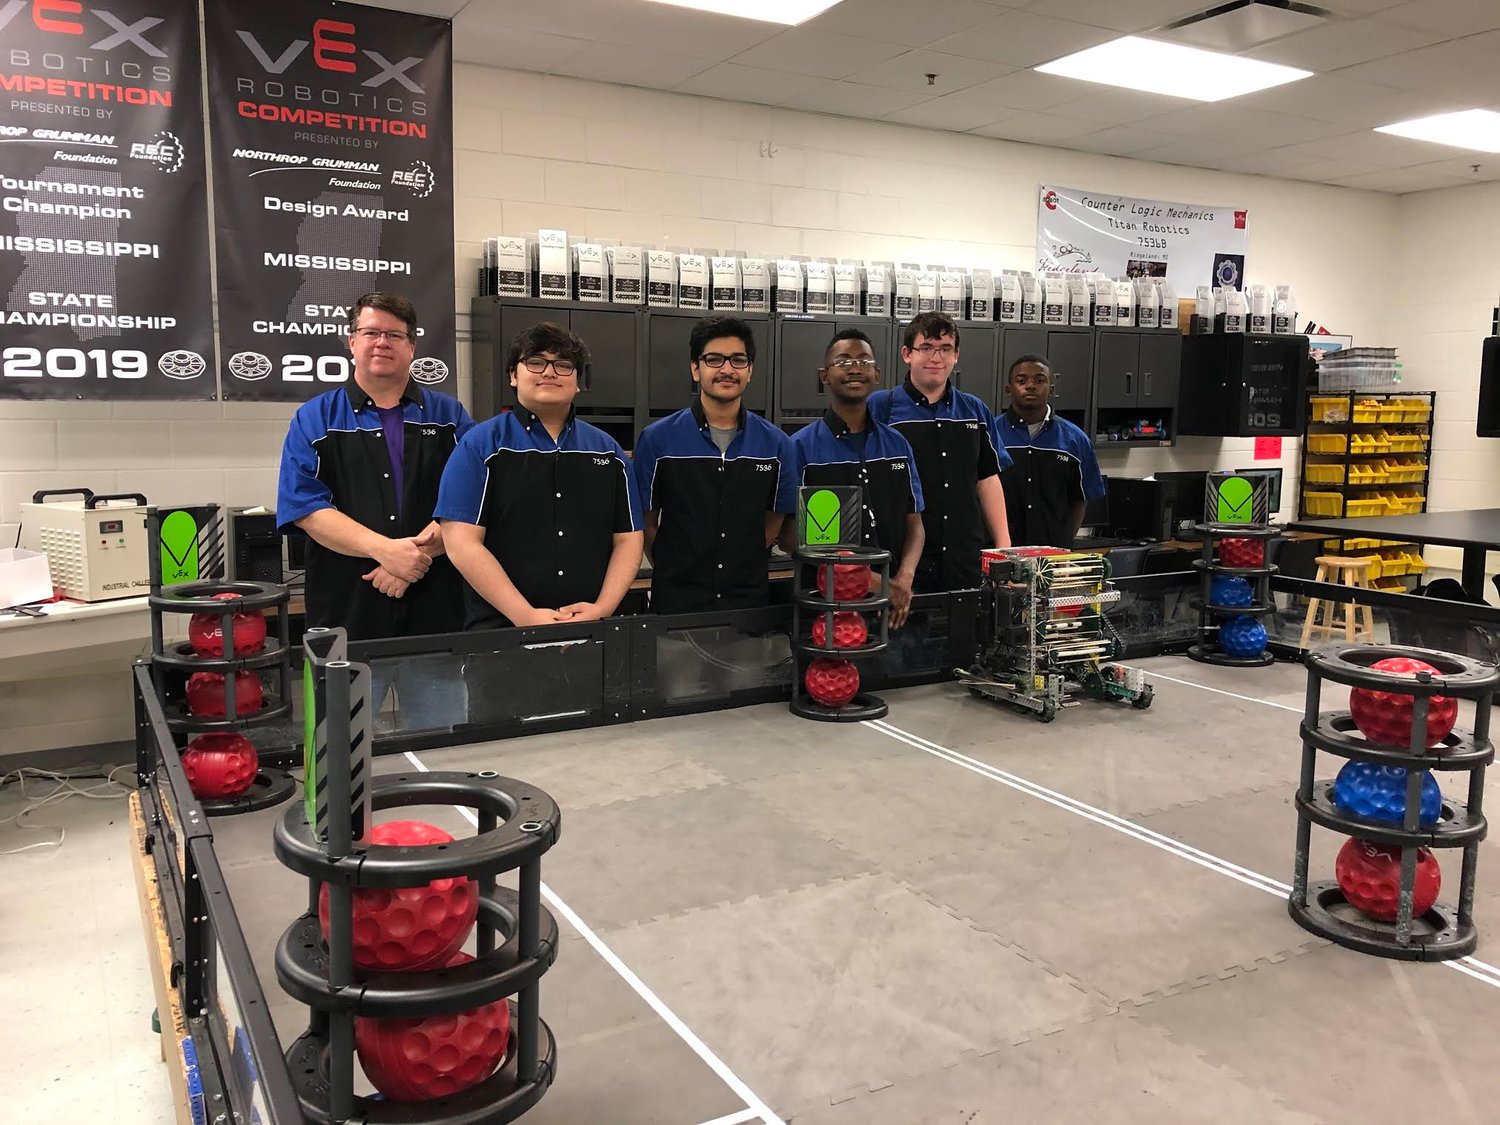 Pictured are winners of the 2021 VEX Robotics World Championship Build Award (l to r) Coach Bill Richardson, Mirage Giri, Shau Saini, Stephen Weathersby, Gabe Bordelon, and Ethan Young. Not Pictured are TJ Idris and Zakarie McDonald.